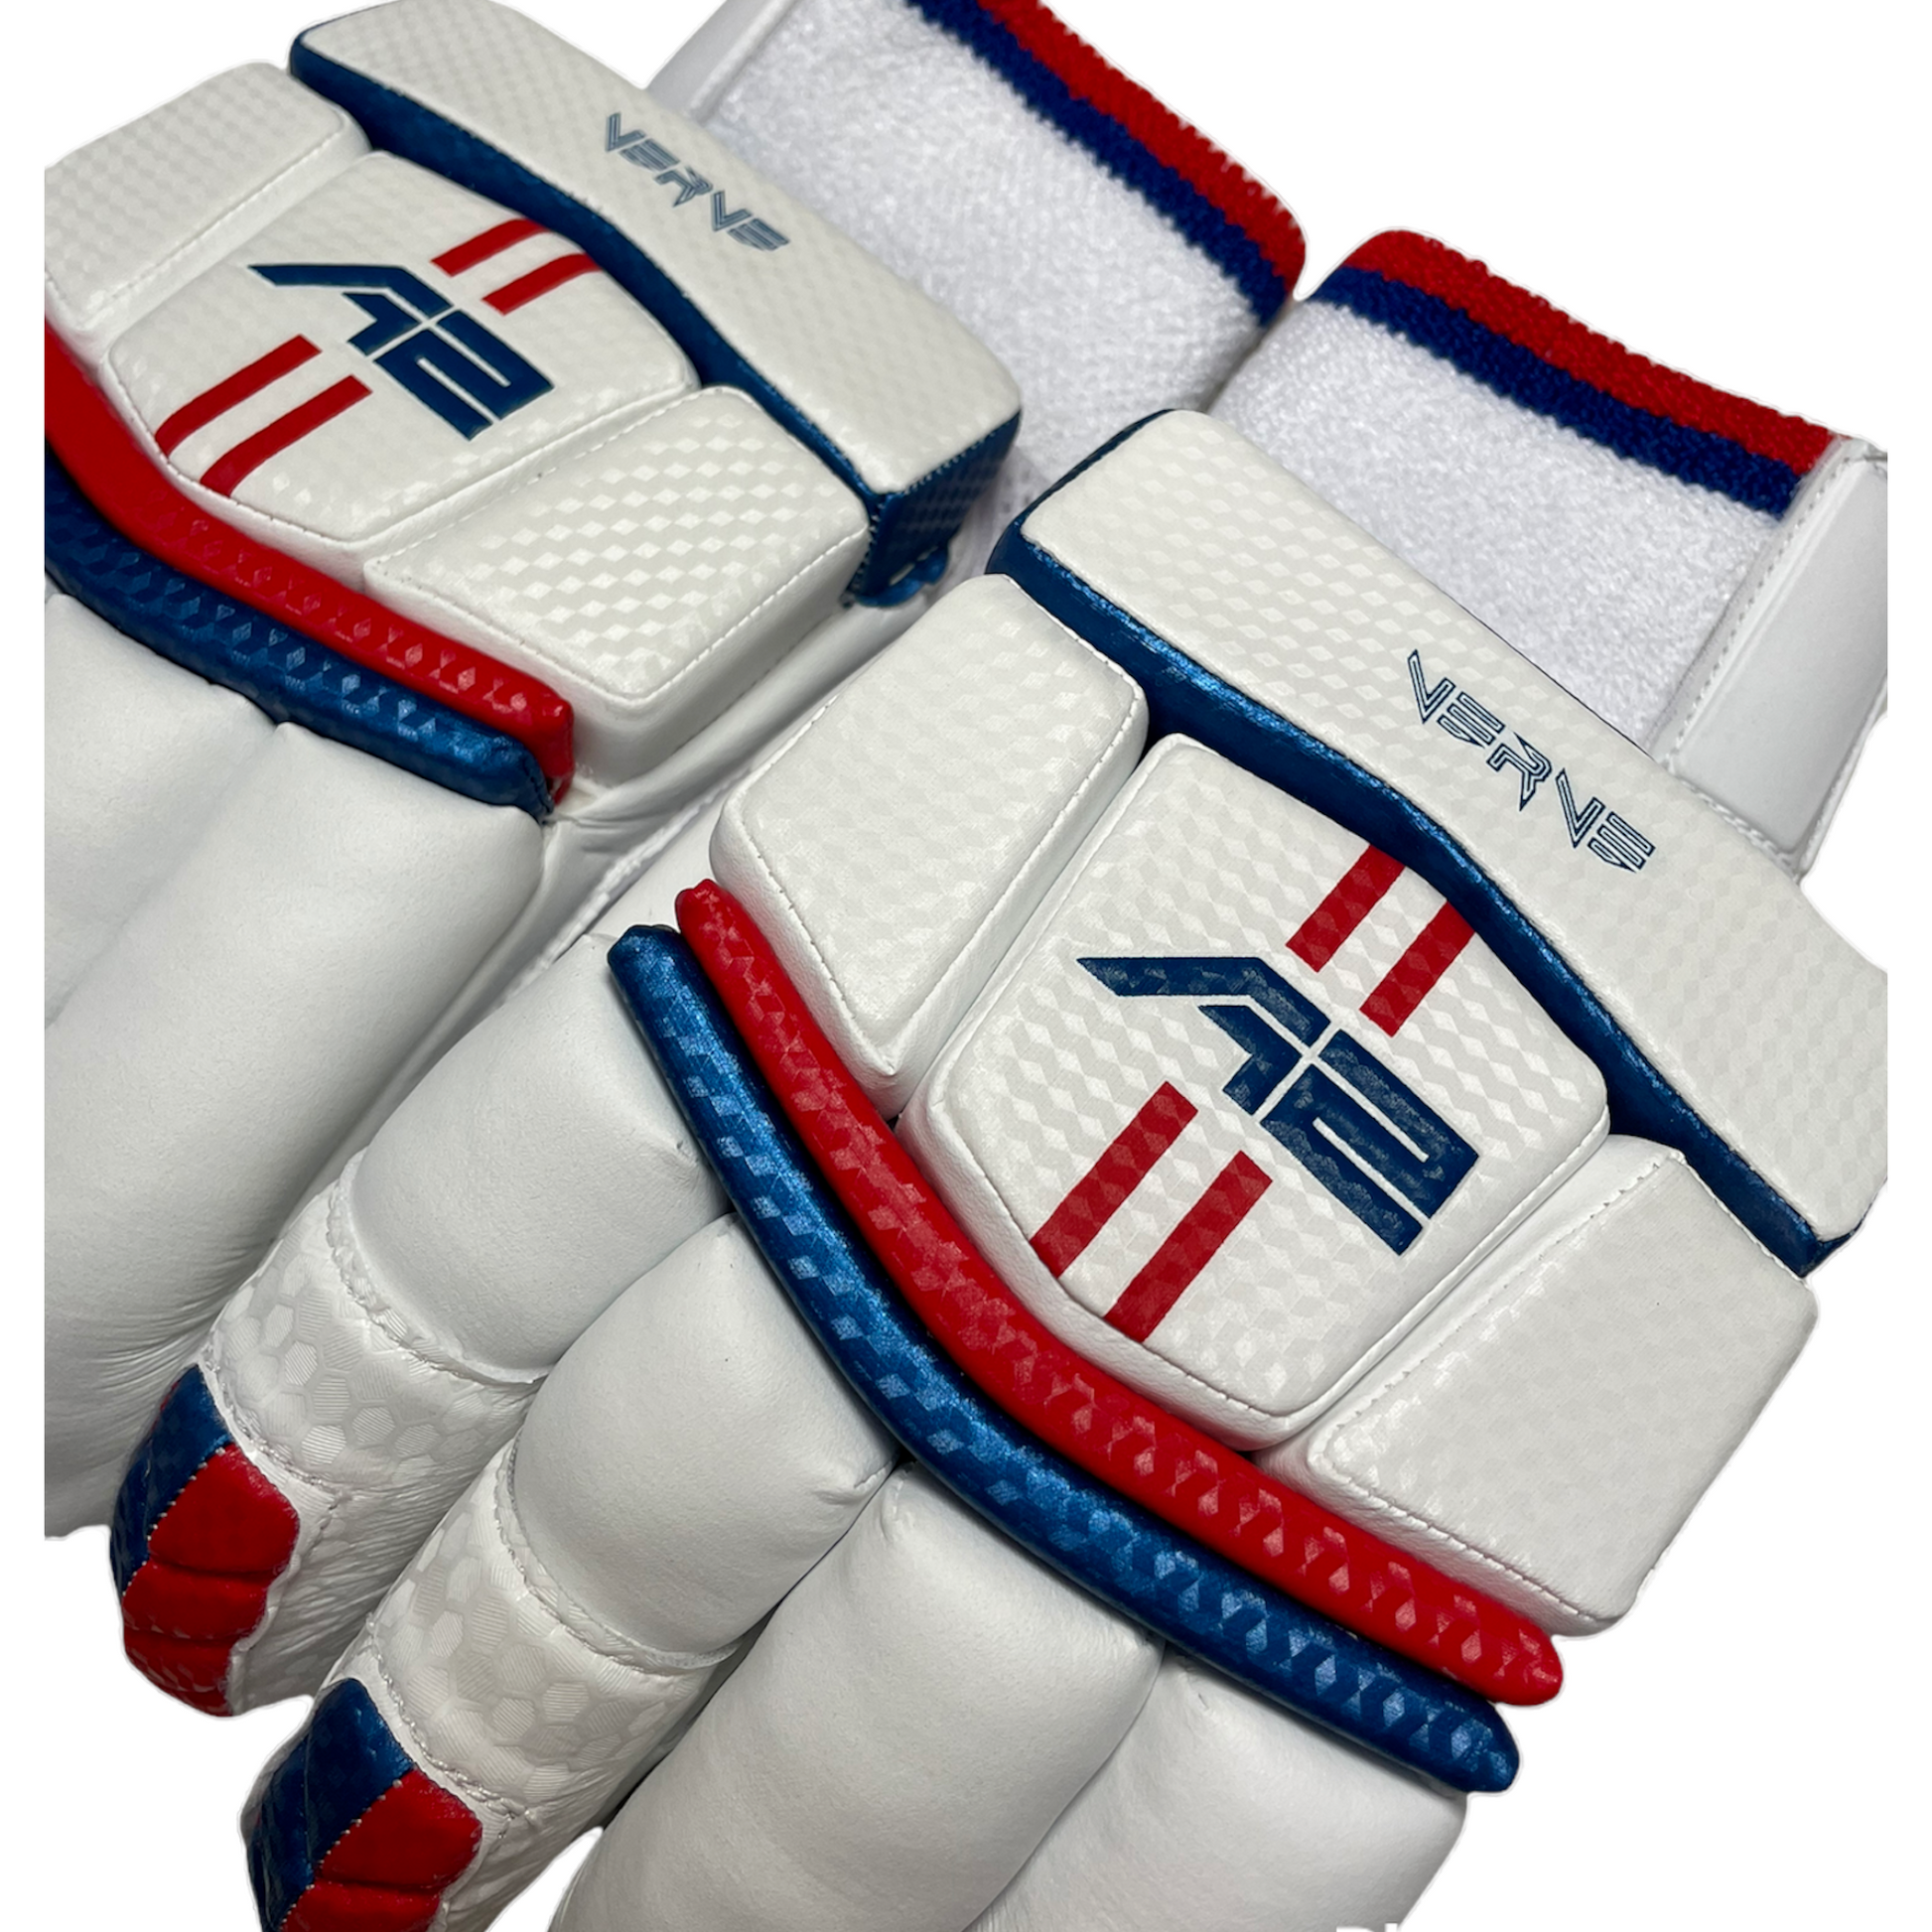 A2 Cricket Batting Gloves official UK Stockist Handmade Handcrafted Cricket Bat Hove East Sussex